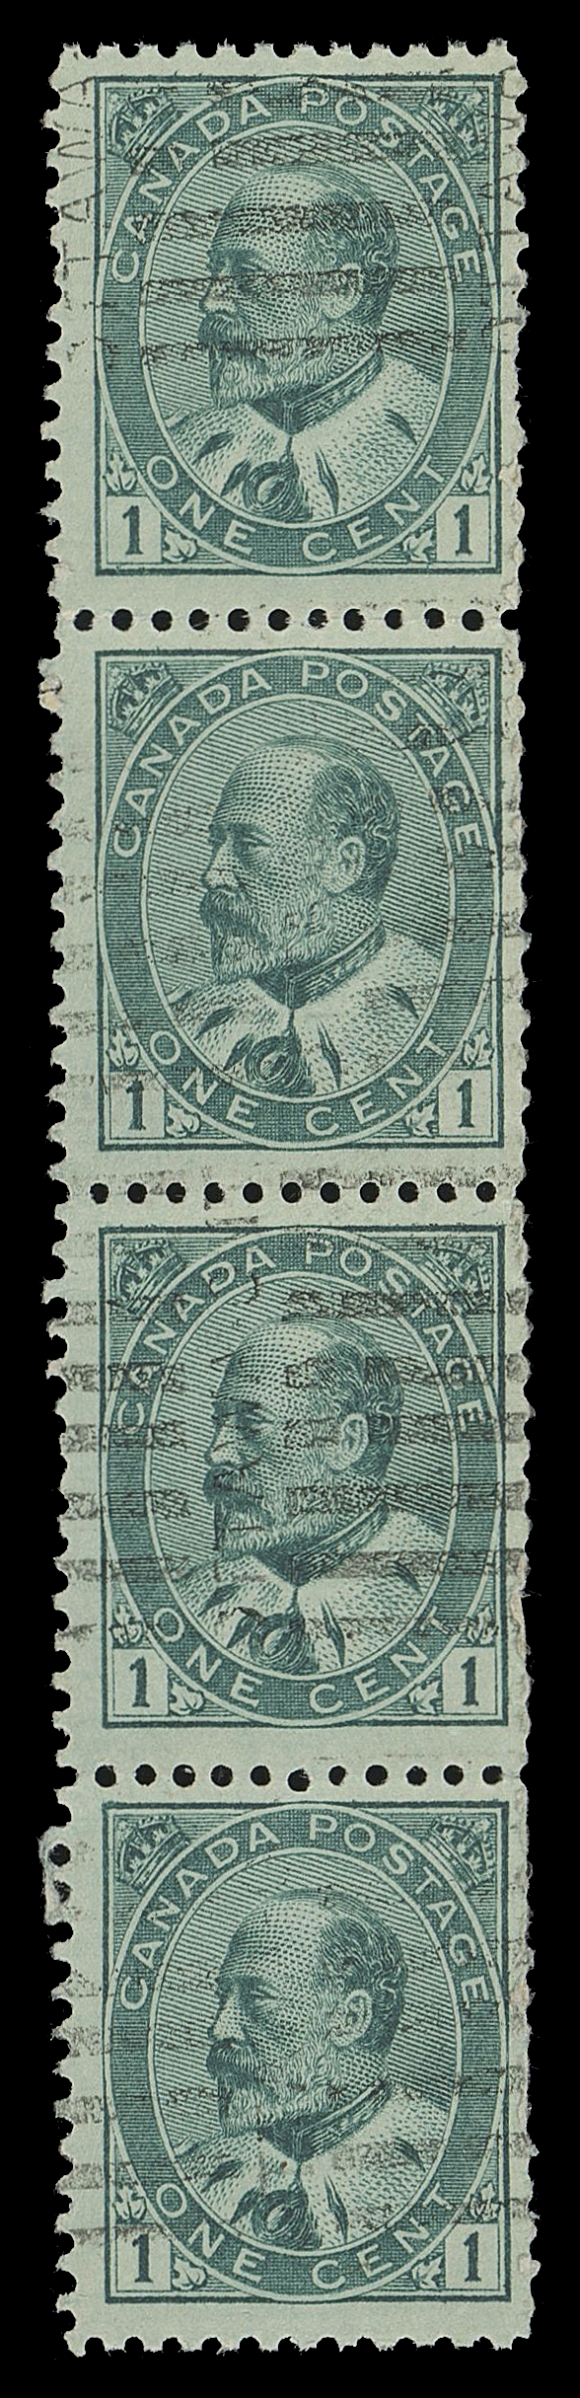 CANADA -  7 KING EDWARD VII  89xxx/90xxxi,Six vertical format coil strips of four or larger (one is composed of two 2c Style S precancelled pairs). Includes three with roller or precancels (with OG or NH), one has paste-up. While other three are mint OG or NH paste-up coil strips; one with faults. Four items pencil signed on reverse (J. Sissons or B. Maresch) and sold on that merit. A scarce lot of these precursor coil stamps.